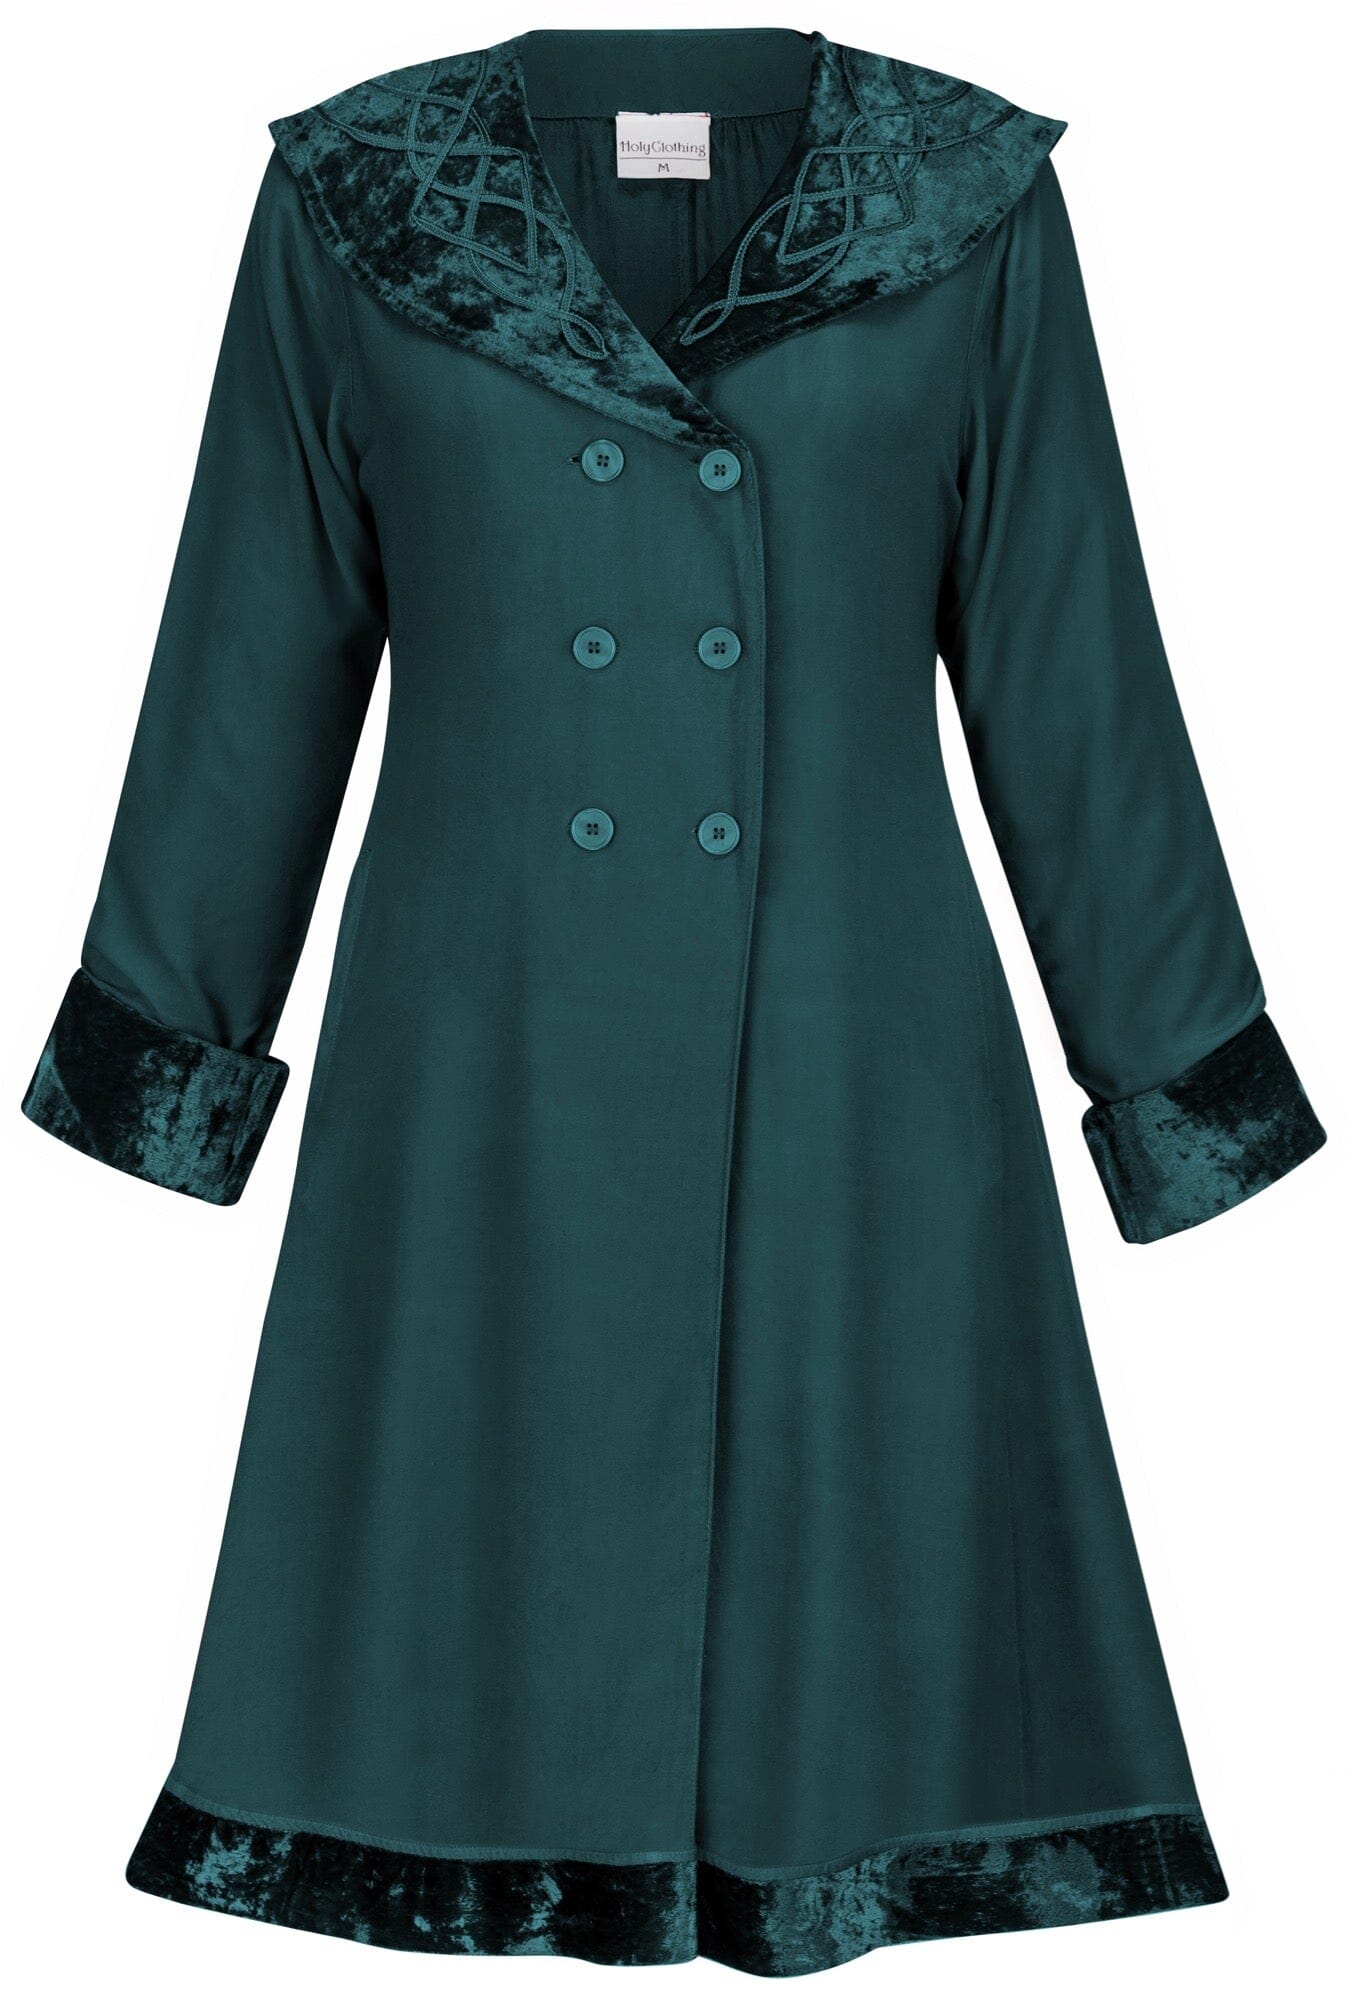 Kelly Coat Limited Edition Teal Peacock